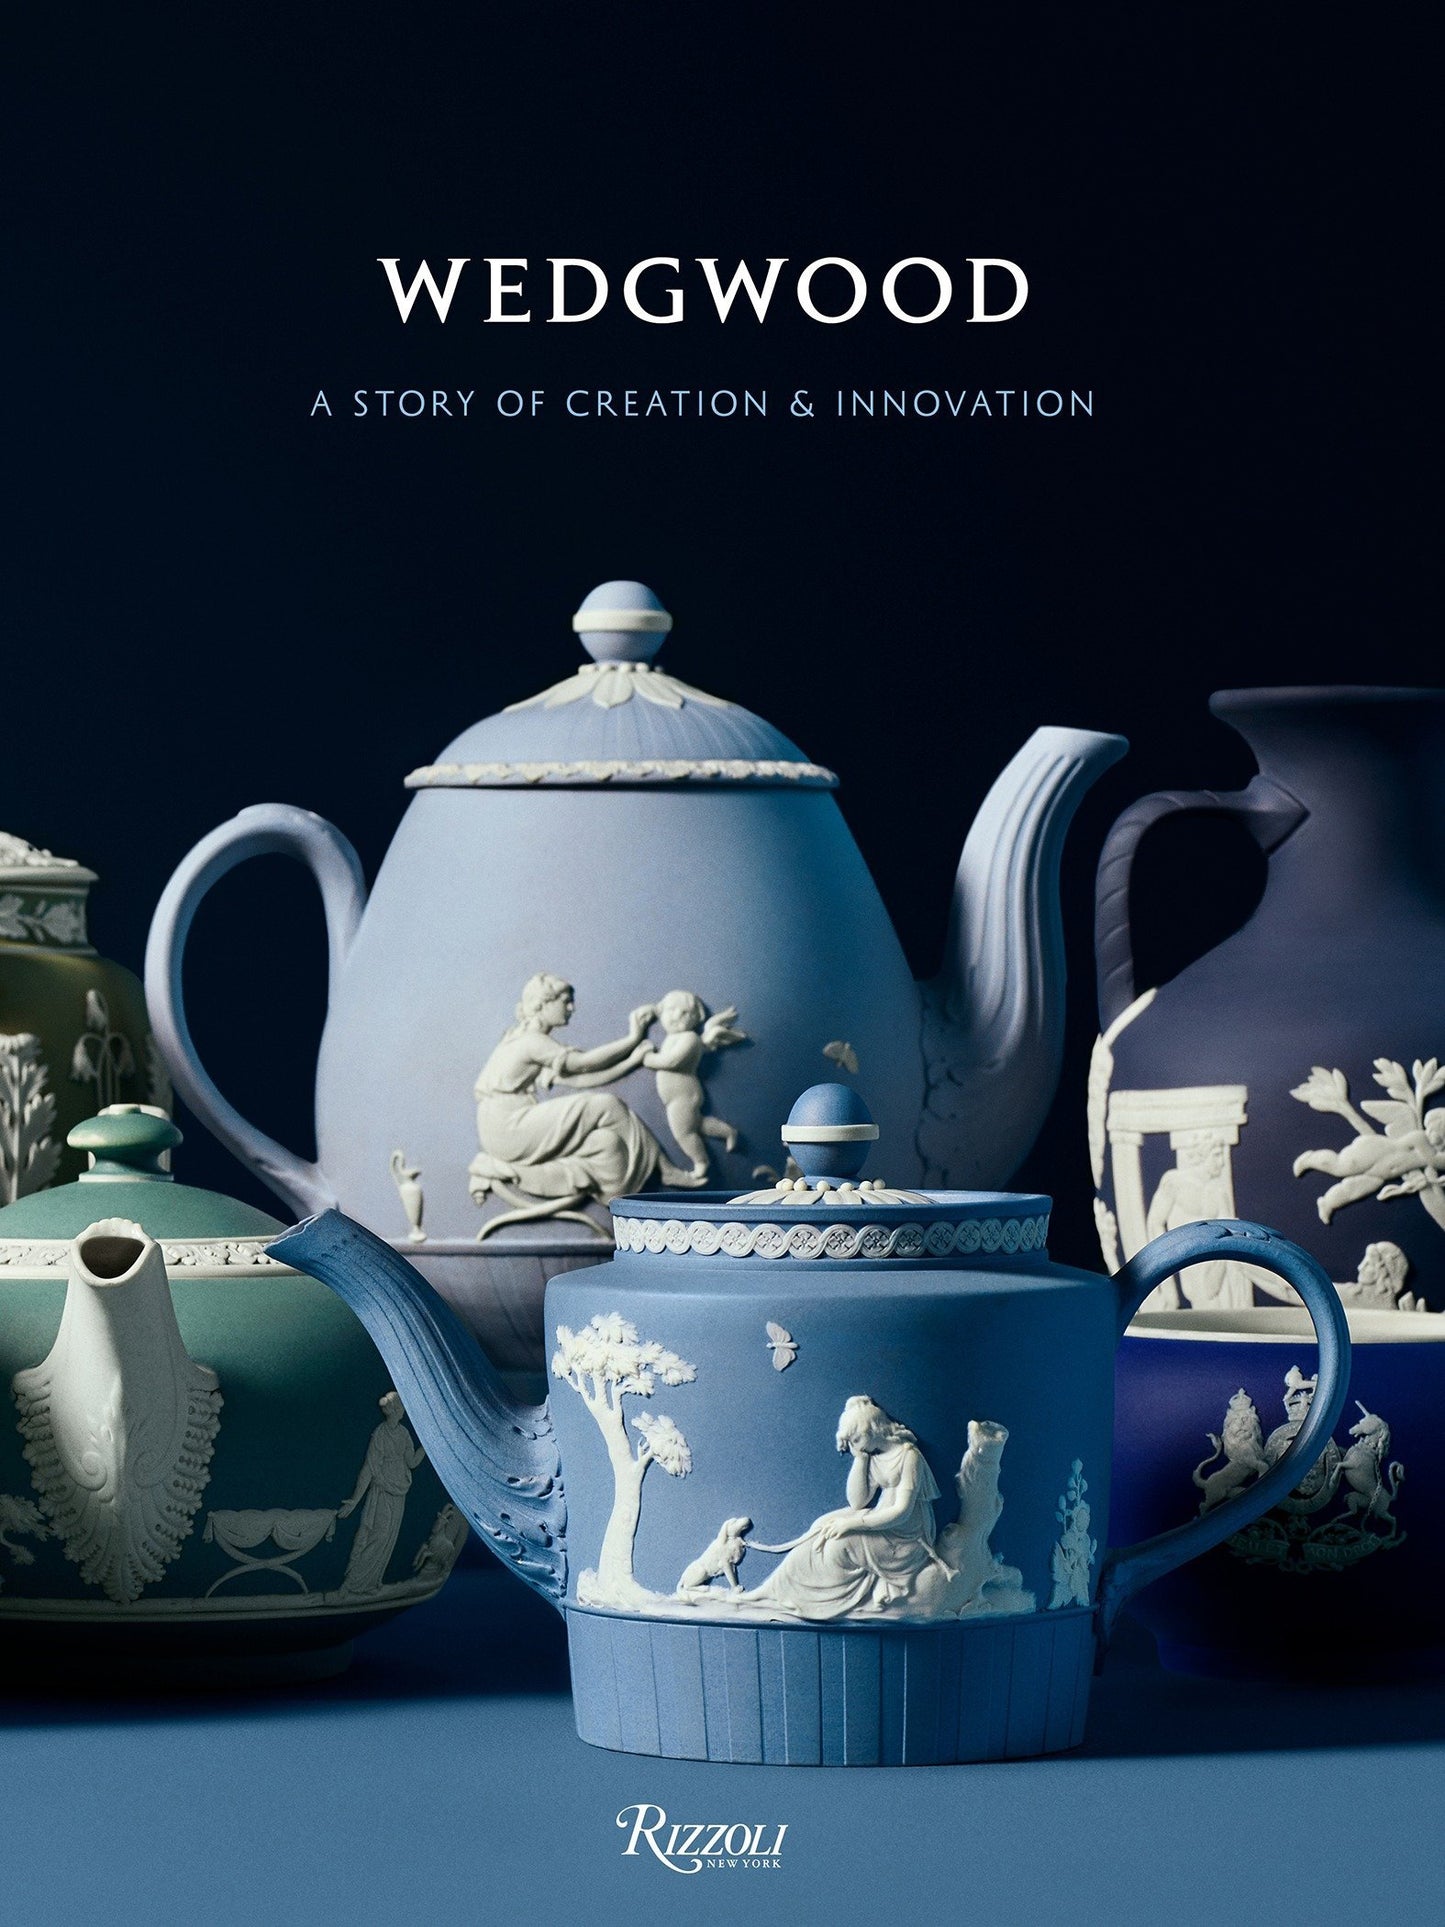 Wedgewood: A Story of Creation & Innovation